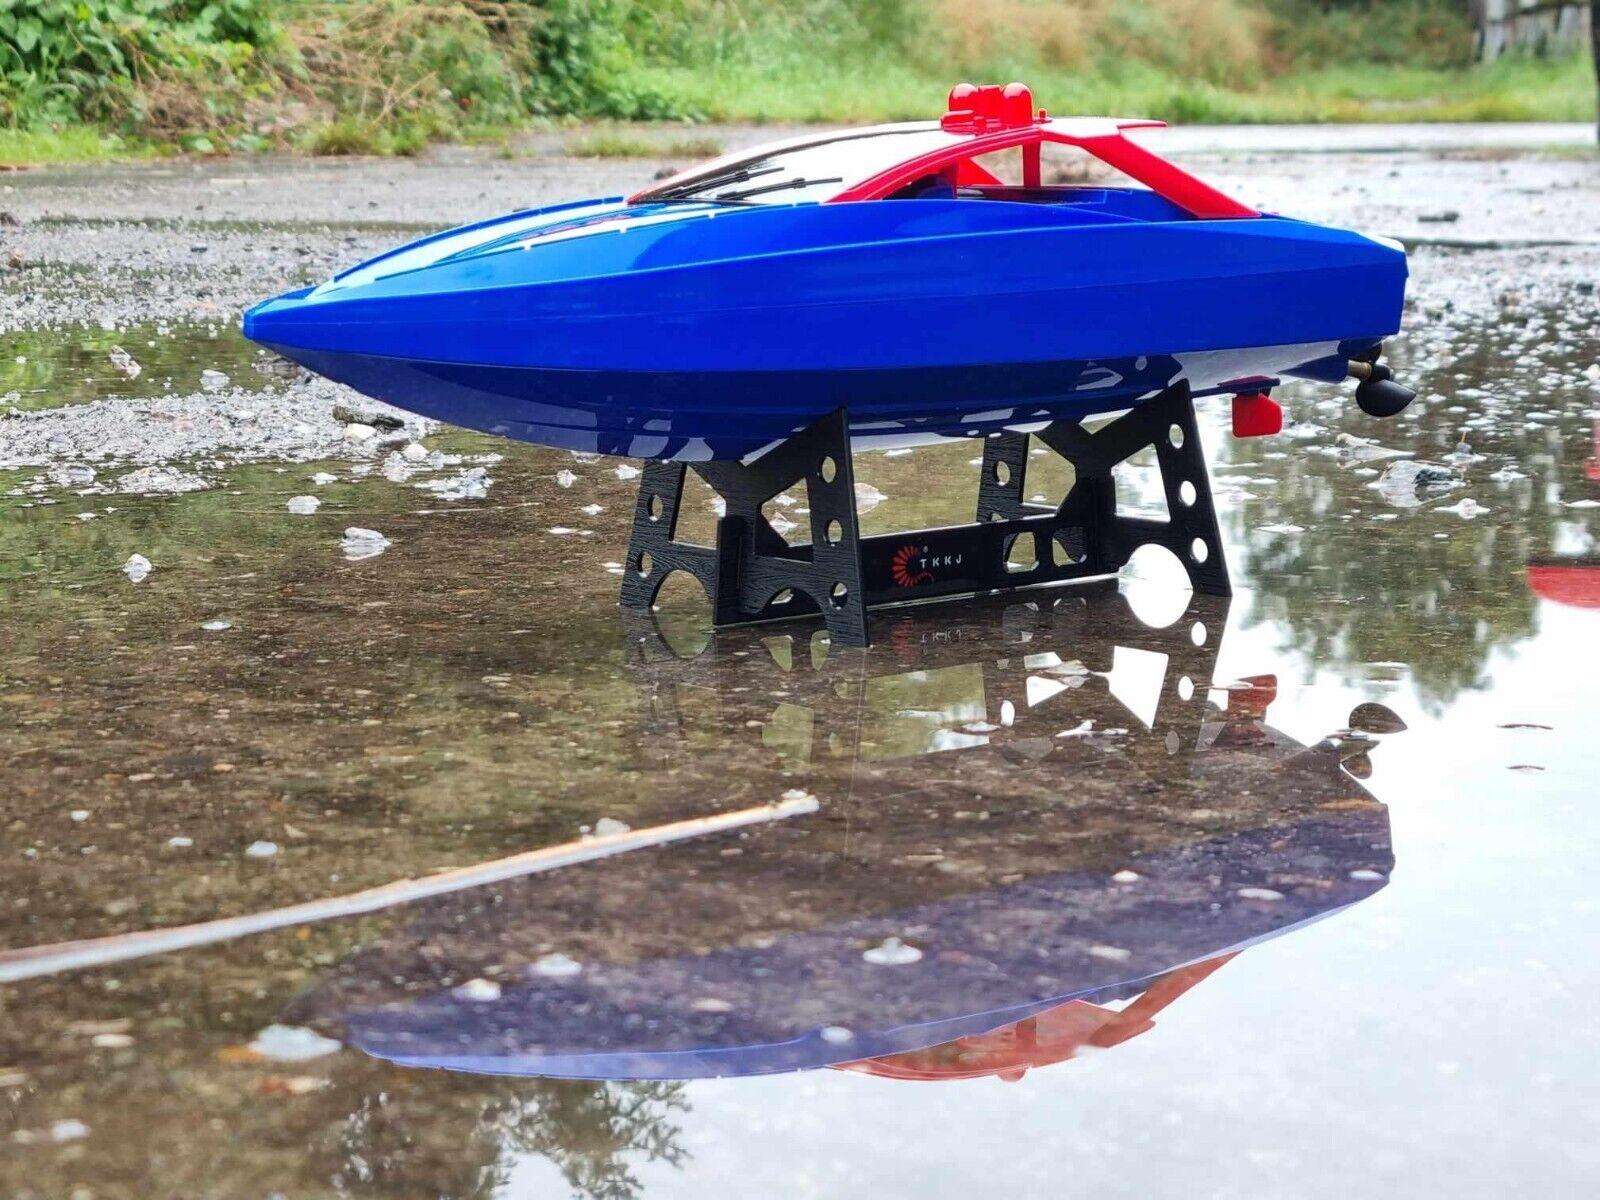 Rc Trawler Boat: Versatile RC Trawler Boats for Hobbies and Education